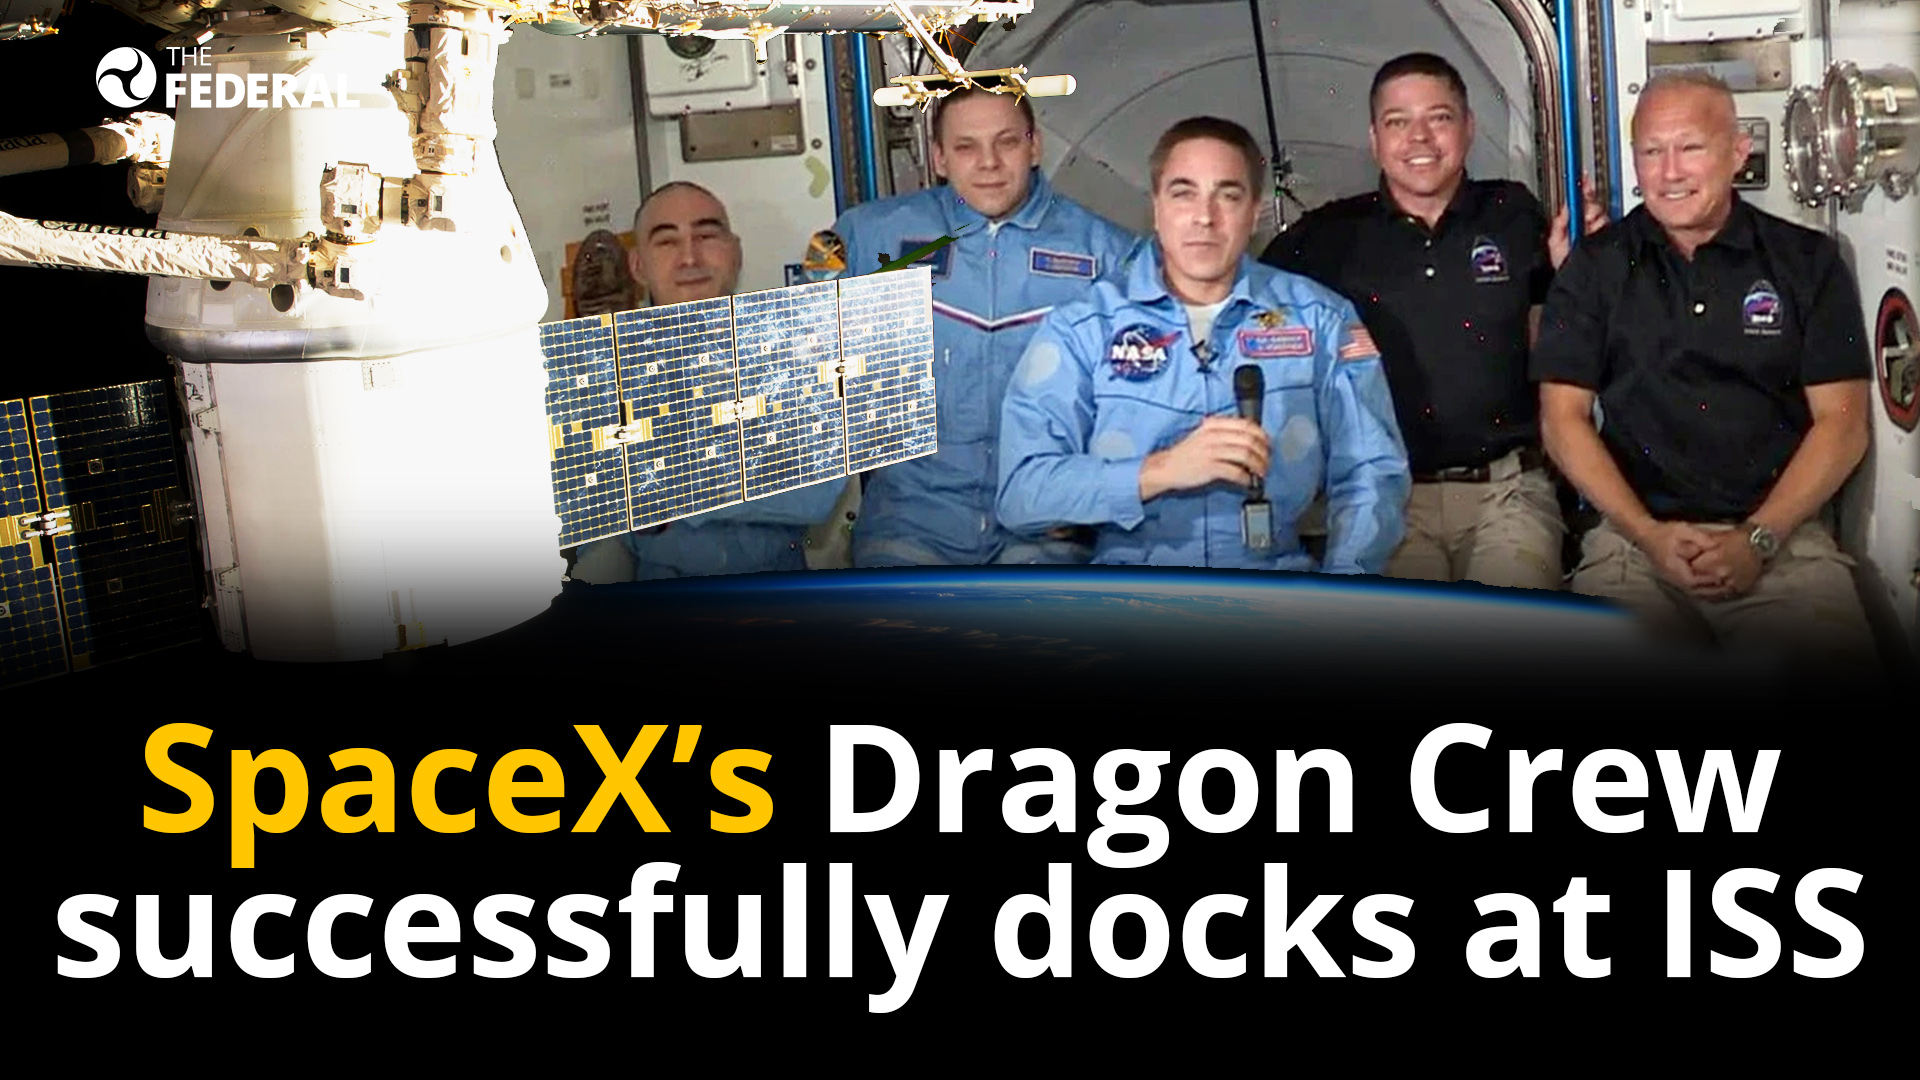 SpaceXs Dragon Crew successfully docks at ISS